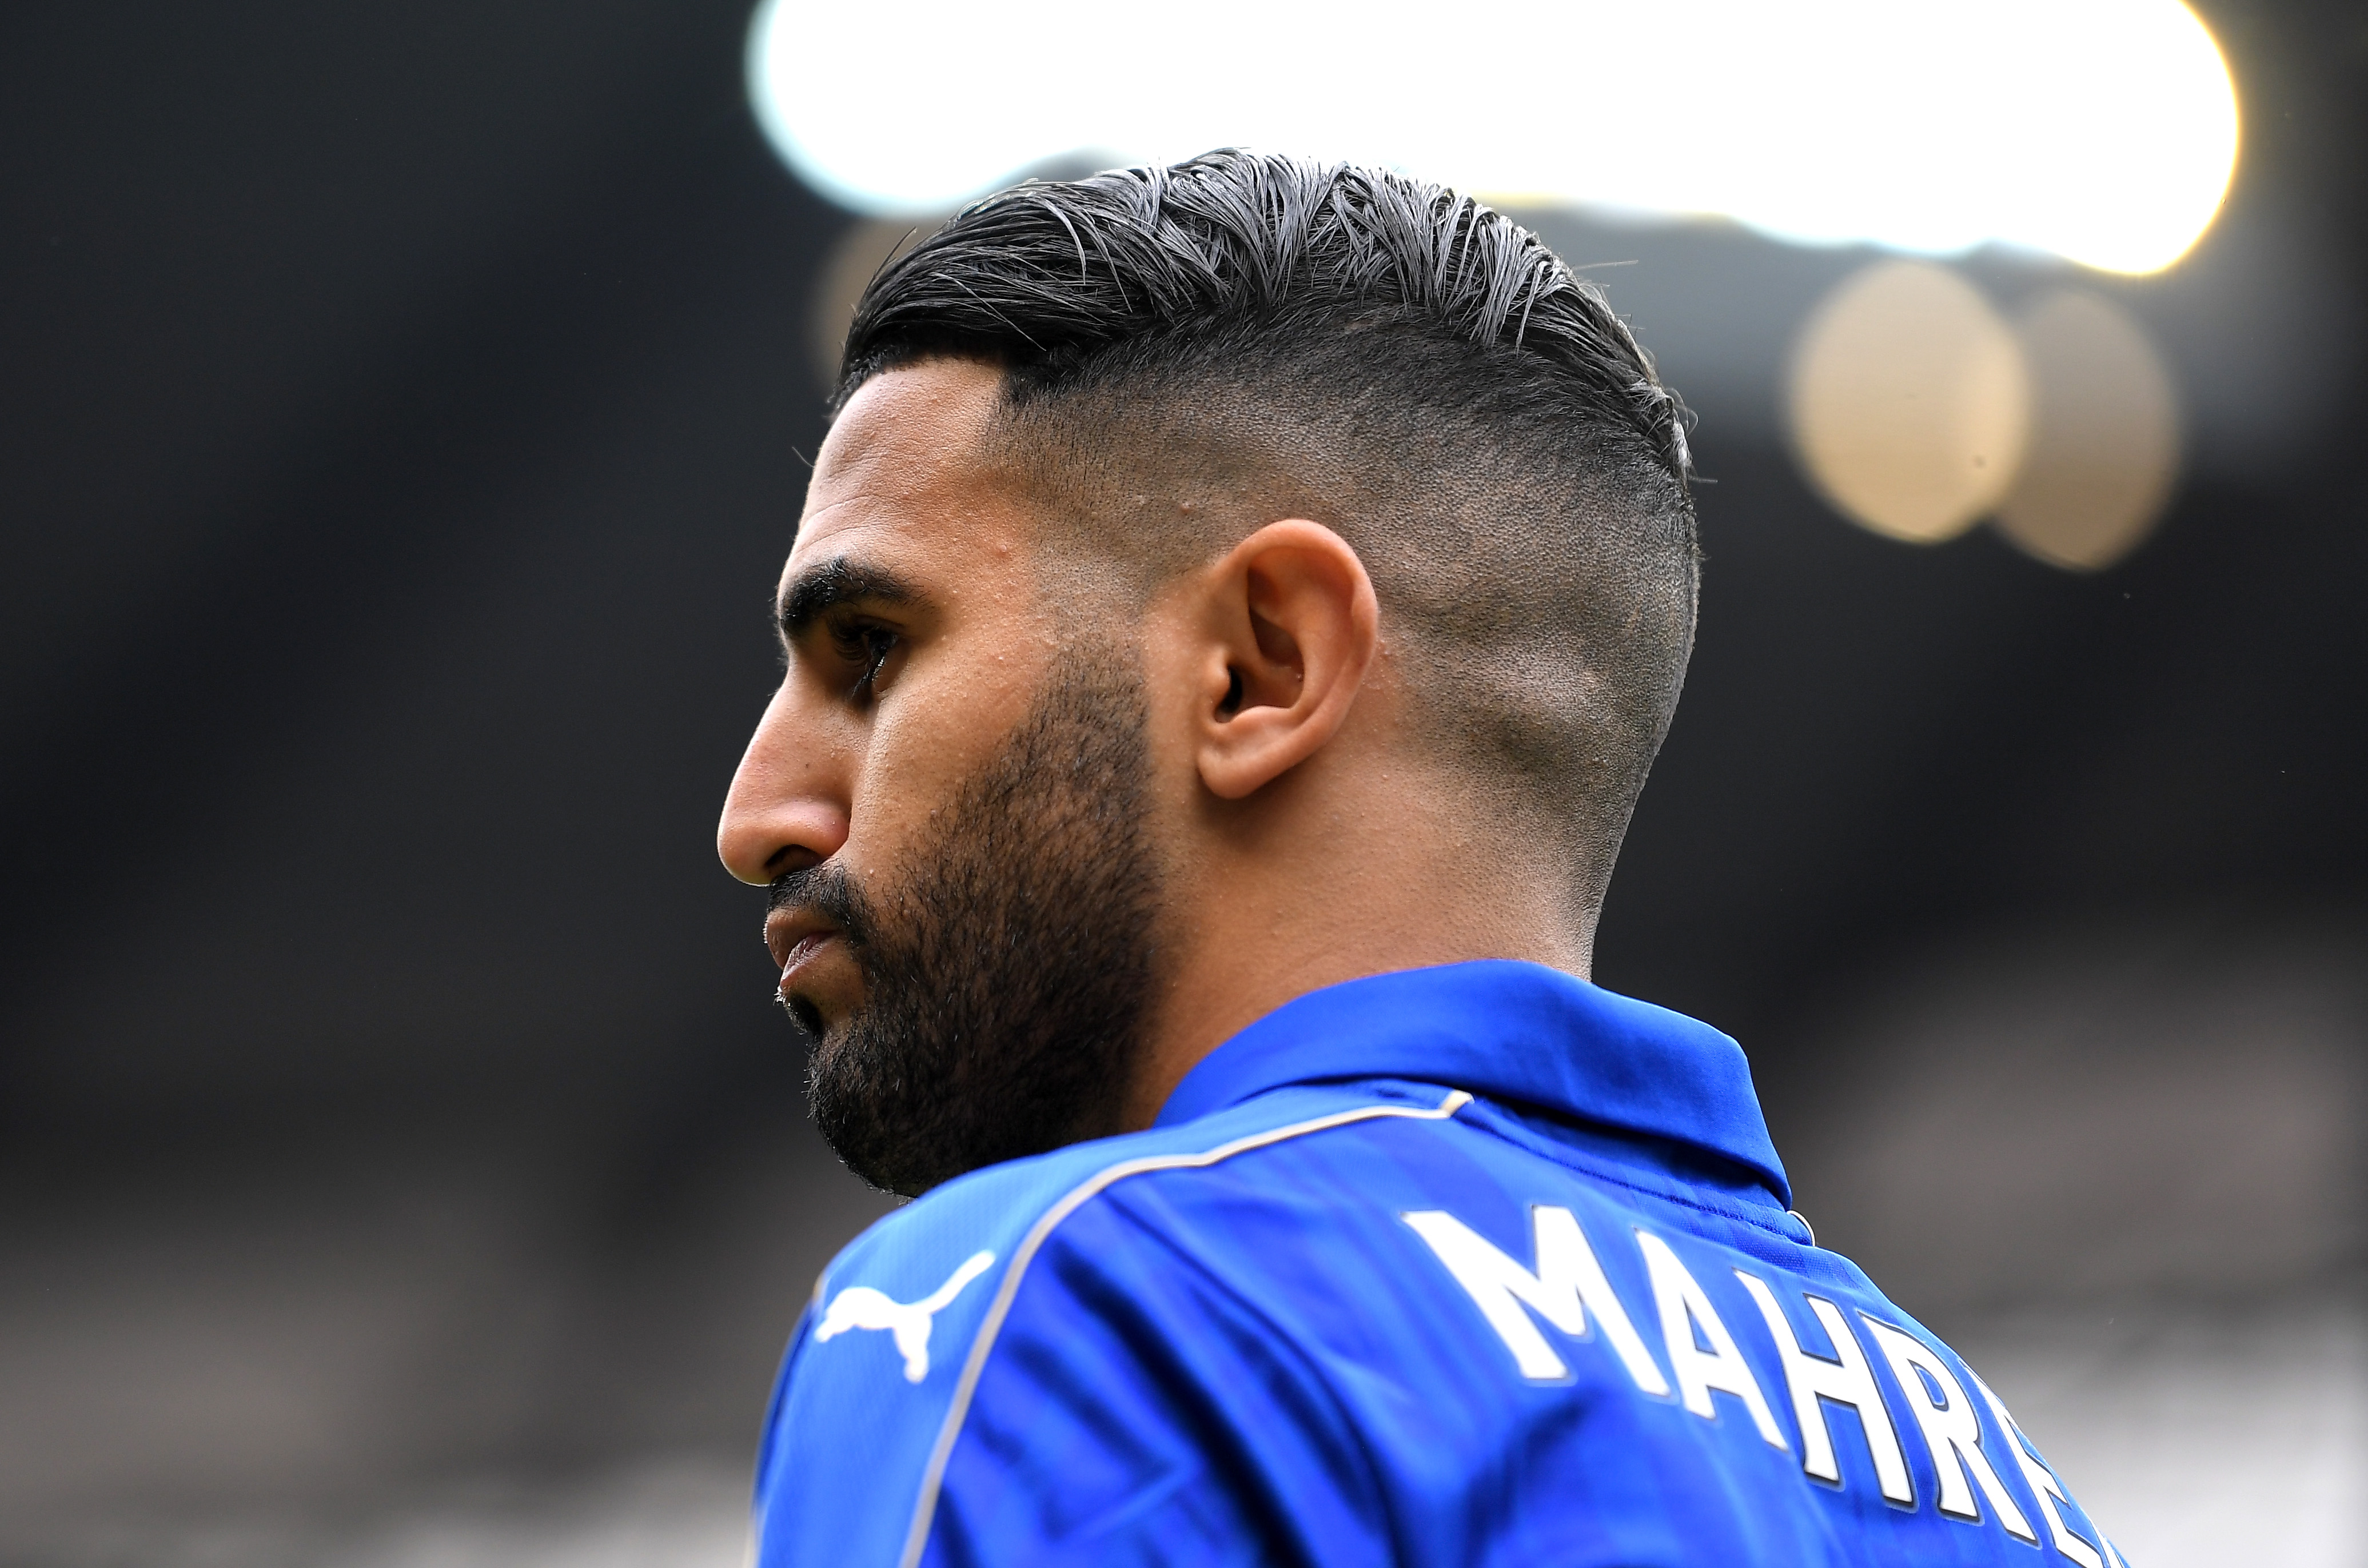 MANCHESTER, ENGLAND - MAY 13: Riyad Mahrez of Leicester City looks on during the Premier League match between Manchester City and Leicester City at Etihad Stadium on May 13, 2017 in Manchester, England.  (Photo by Laurence Griffiths/Getty Images)